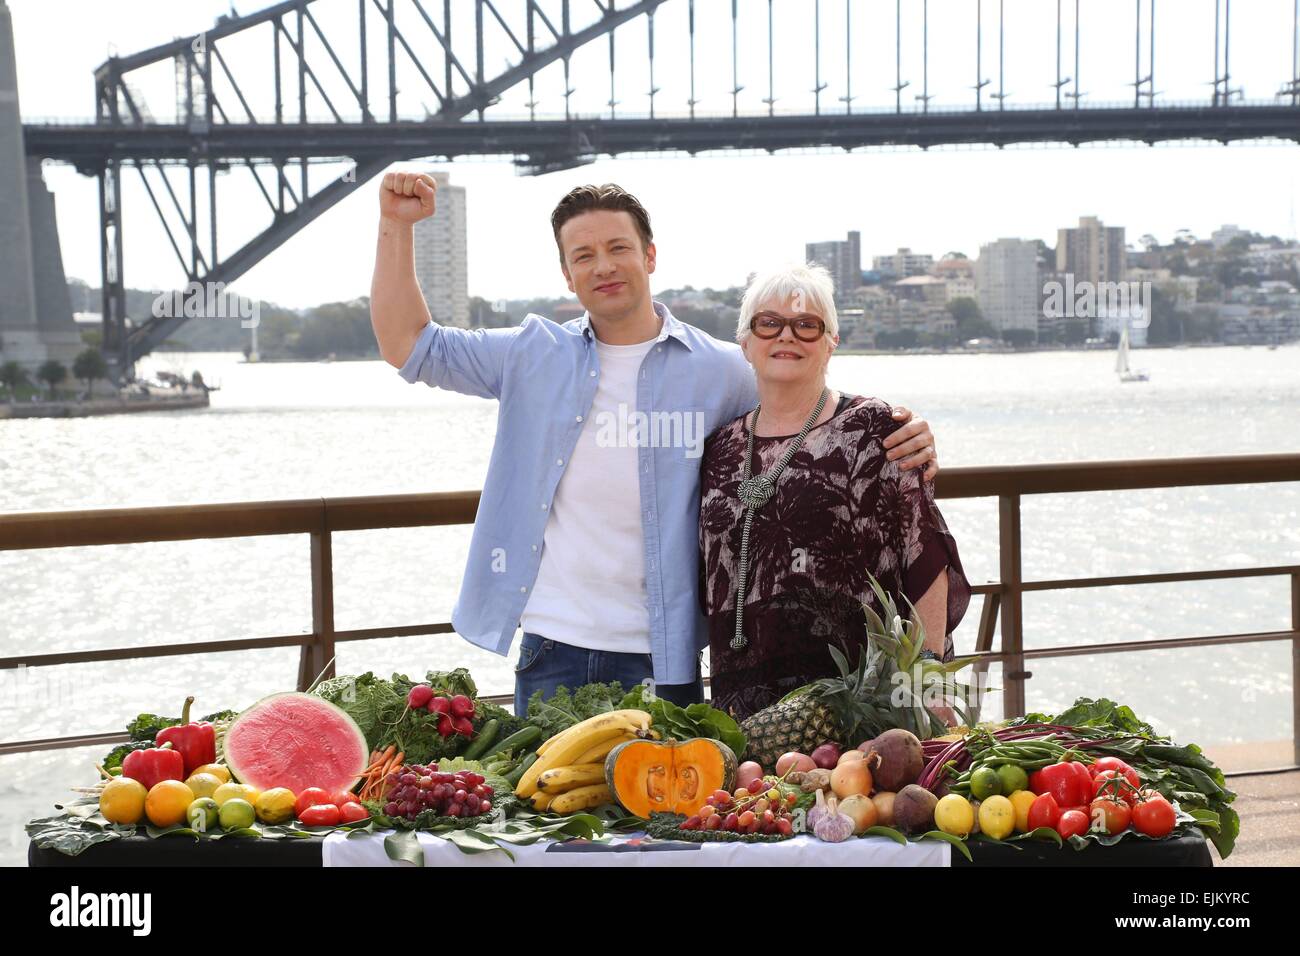 Sydney, Australia. 29 March 2015. British celebrity chef Jamie Oliver launched a global change.org petition to demand compulsory food education for all children. The petition aims to persuade the governments of the G20 countries to provide their nations’ children with the basic “human right” of food education in schools. Pictured is Jamie Oliver and Australian Cook and Restaurateur, Stephanie Alexander. Credit: Richard Milnes/Alamy Live News Stock Photo